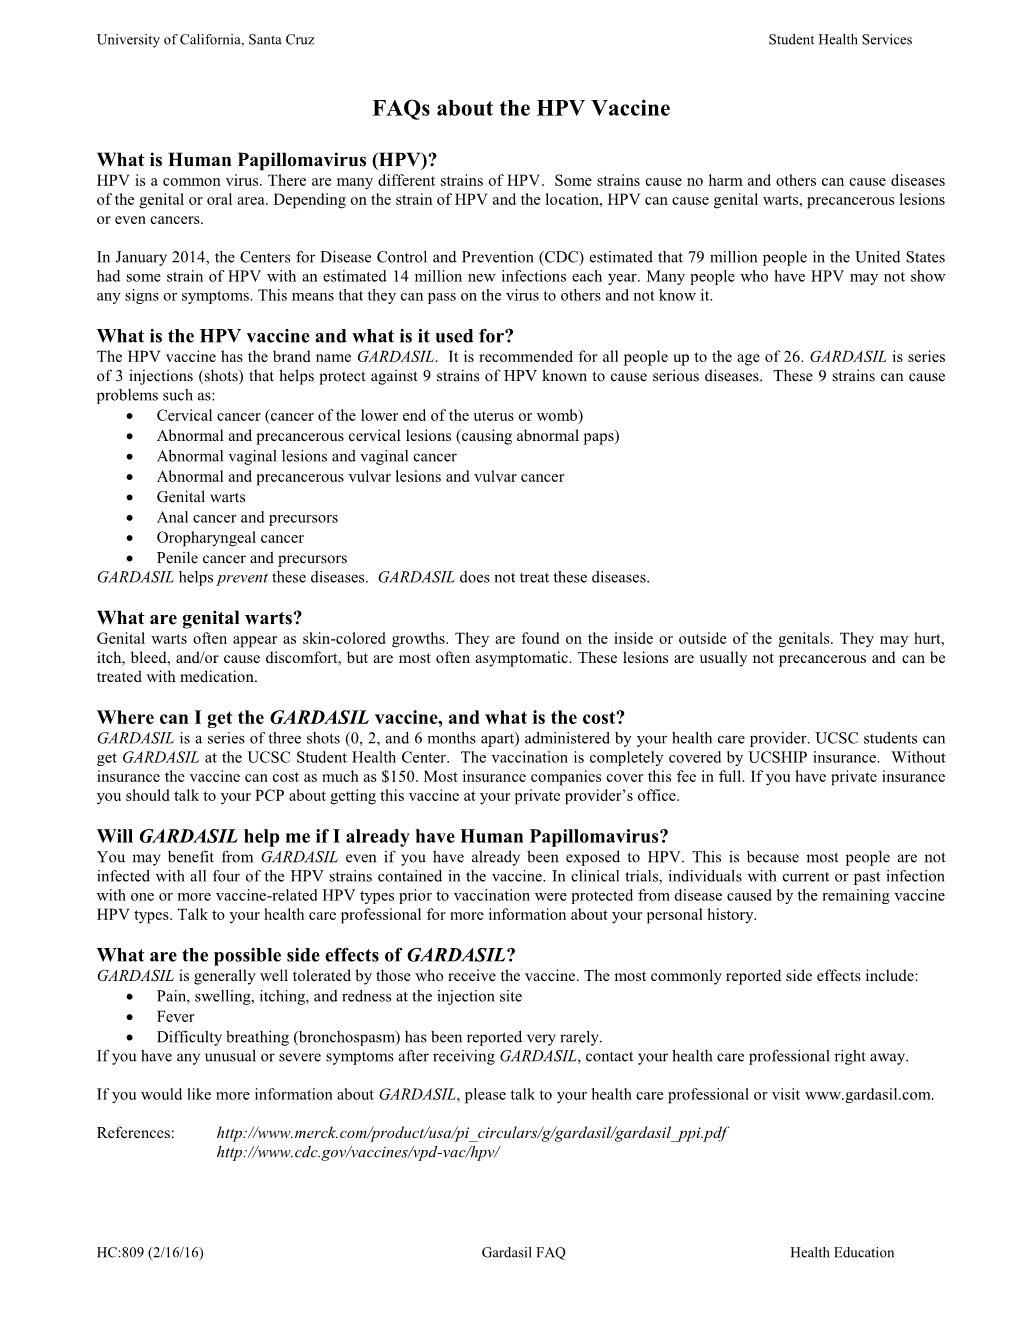 Faqs About the HPV Vaccine (Gardasil)